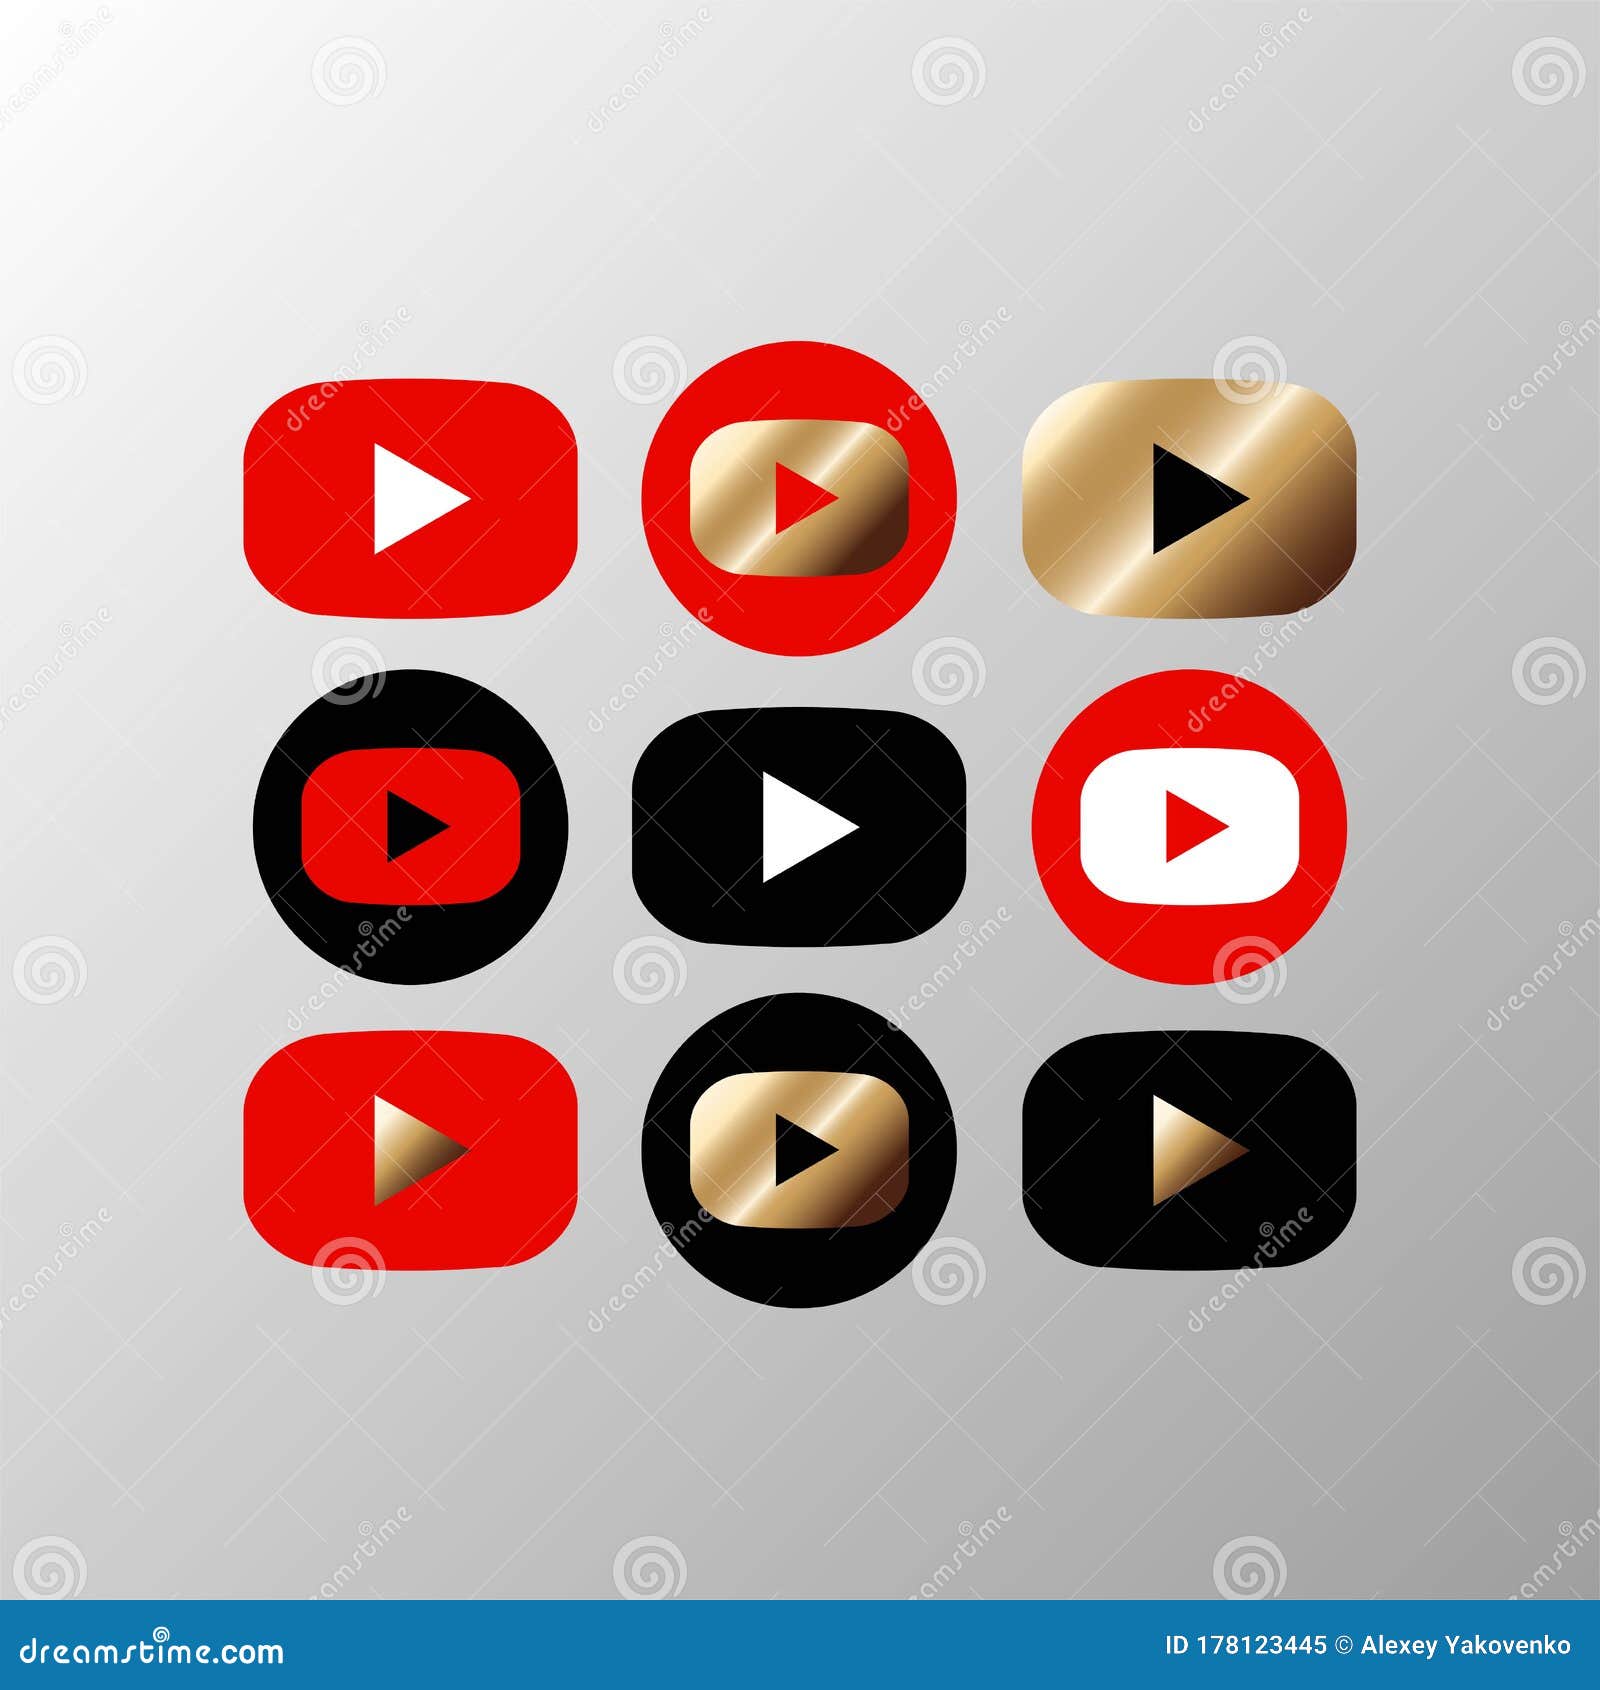 Media Player Button Icon Set In Black Red Gold Color On An Isolated White Background Eps 10 Vector Editorial Image Illustration Of Cinema Design